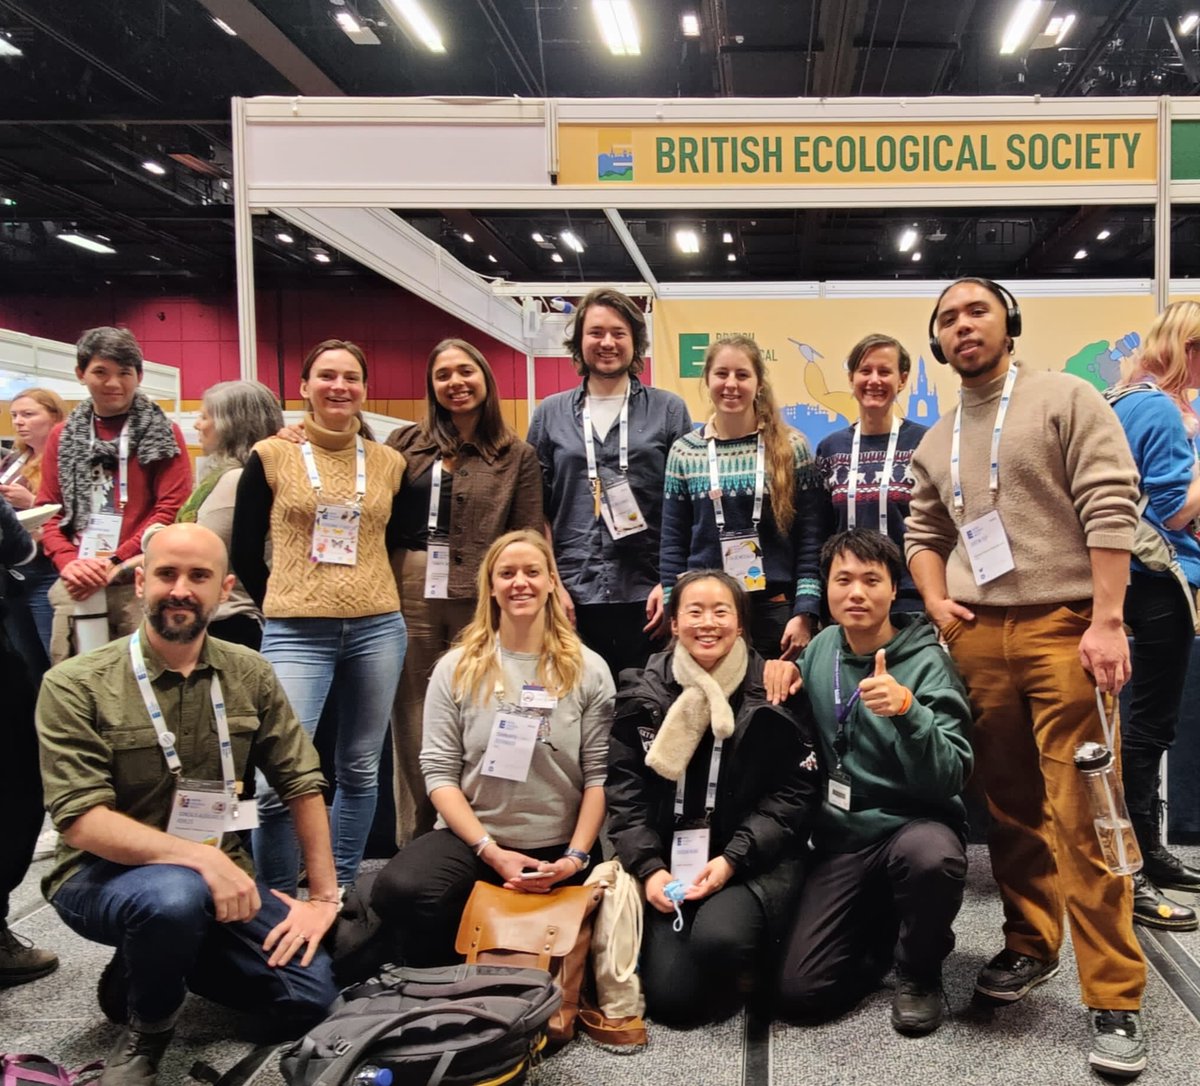 These past four days have been amazing! Lots of contacts and feedback, huge opportunities for new adventures, and lots of fun and science. And all of this in the best of companies. Thanks to the @UCLCBER team for another amazing year at #BES2022!